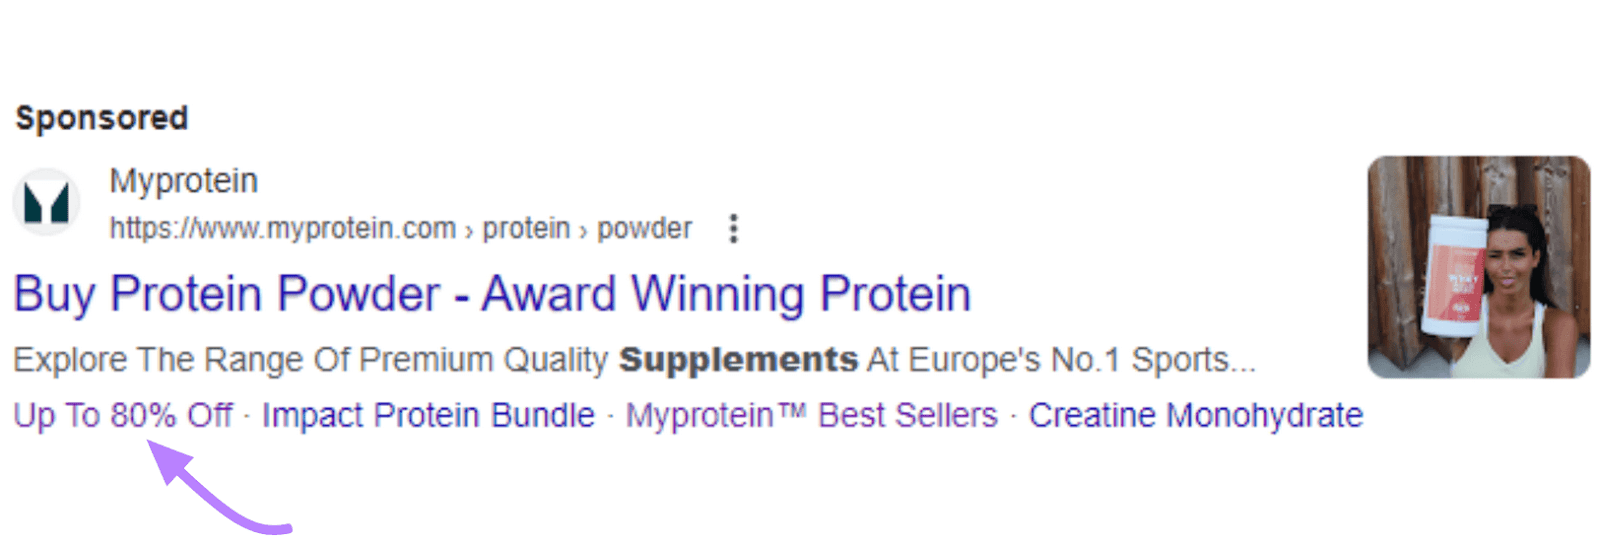 "Up To 80% Off" CTA highlighted in Myprotein’s ad for “protein powder”